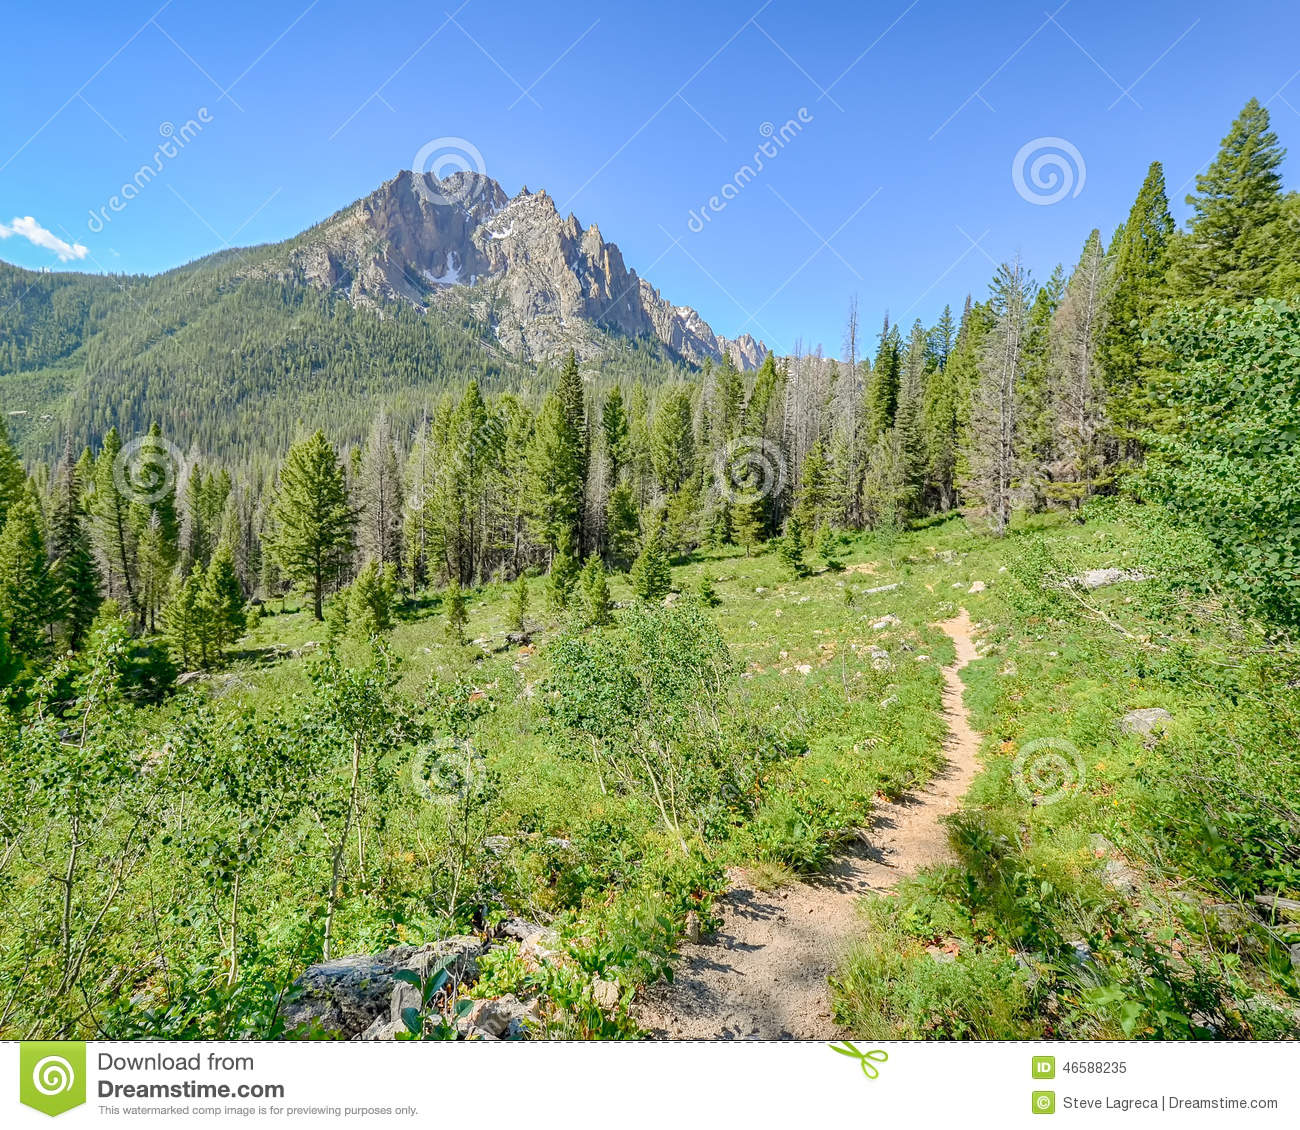 Sawtooth National Recreation Area svg #17, Download drawings